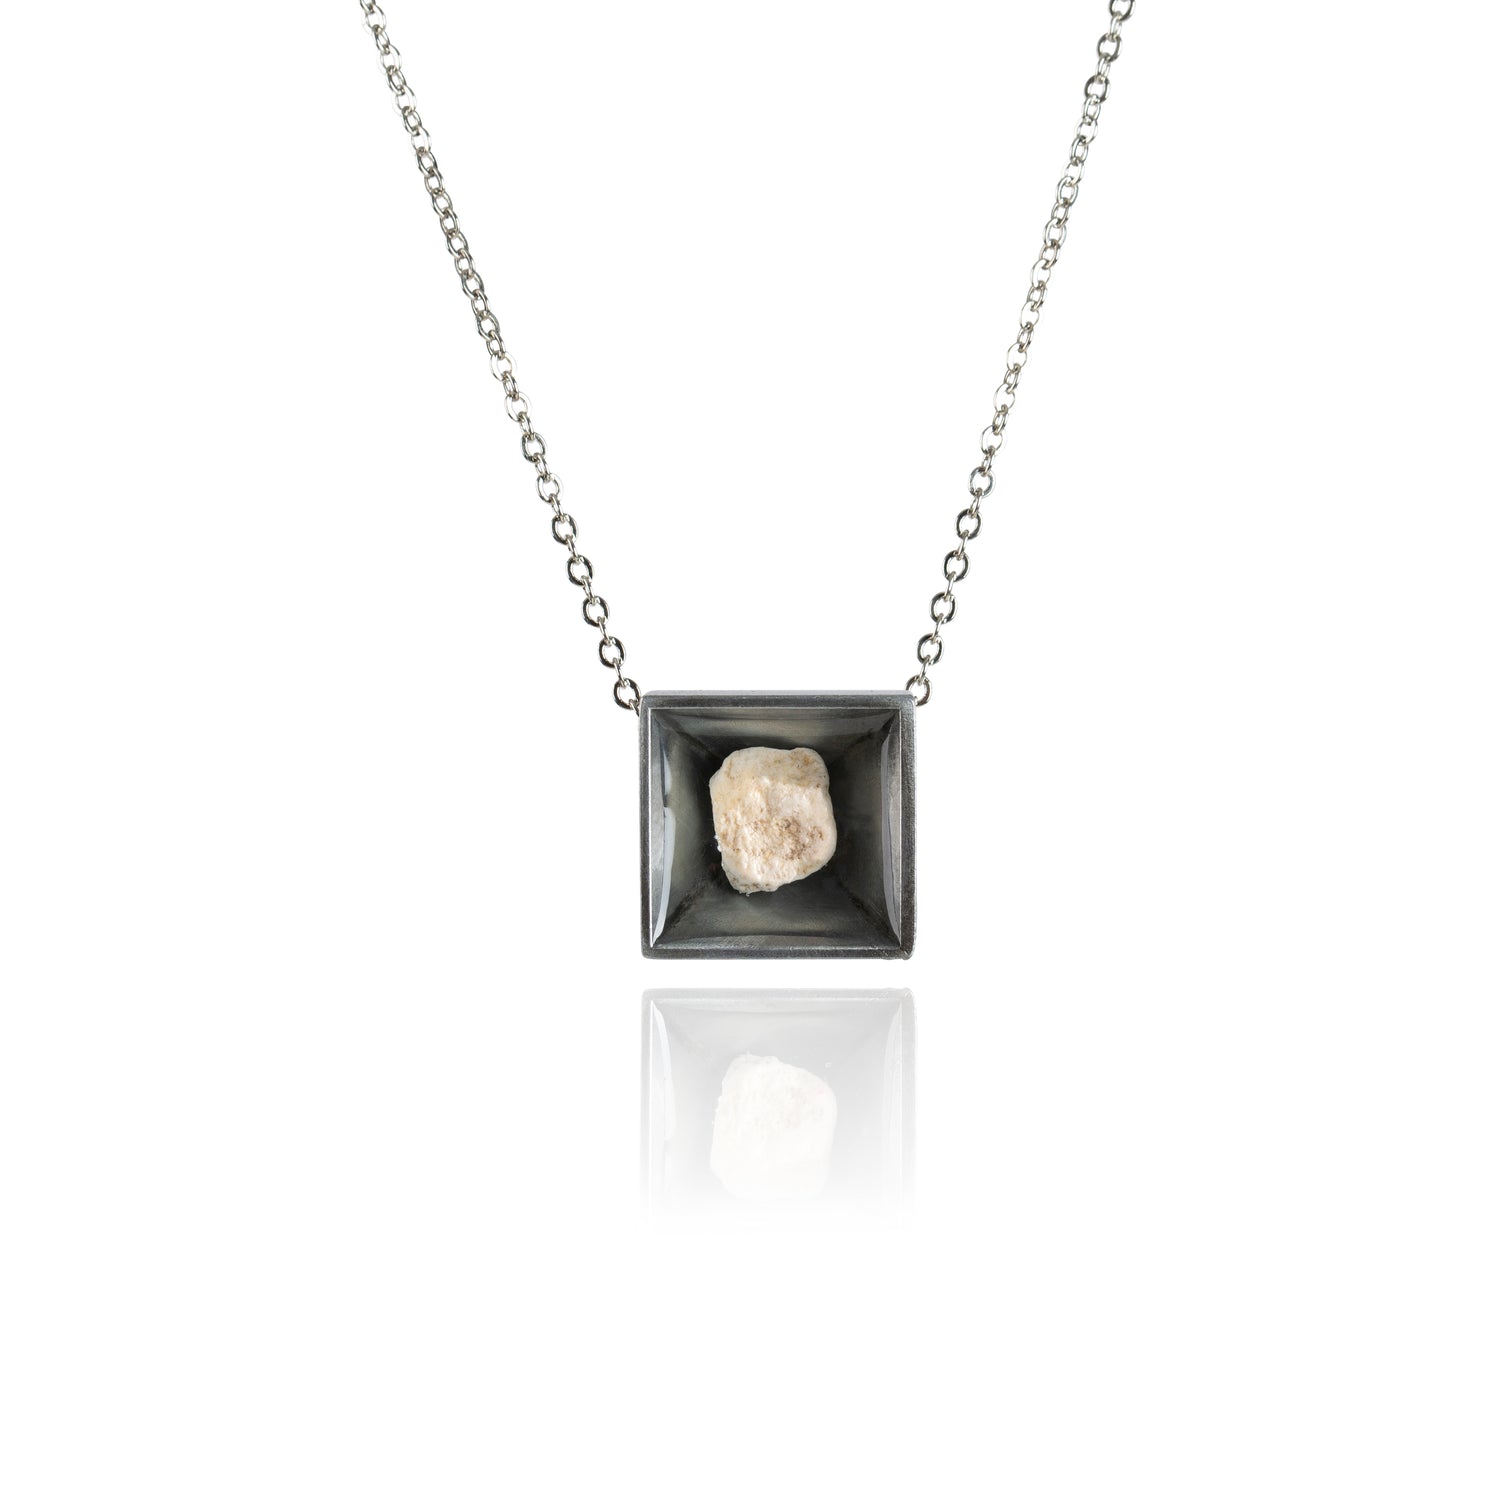 A small natural tan stone sitting in the middle of a square shaped metal pendant in a dark silver color. The pendant is hanging on a silver chain.